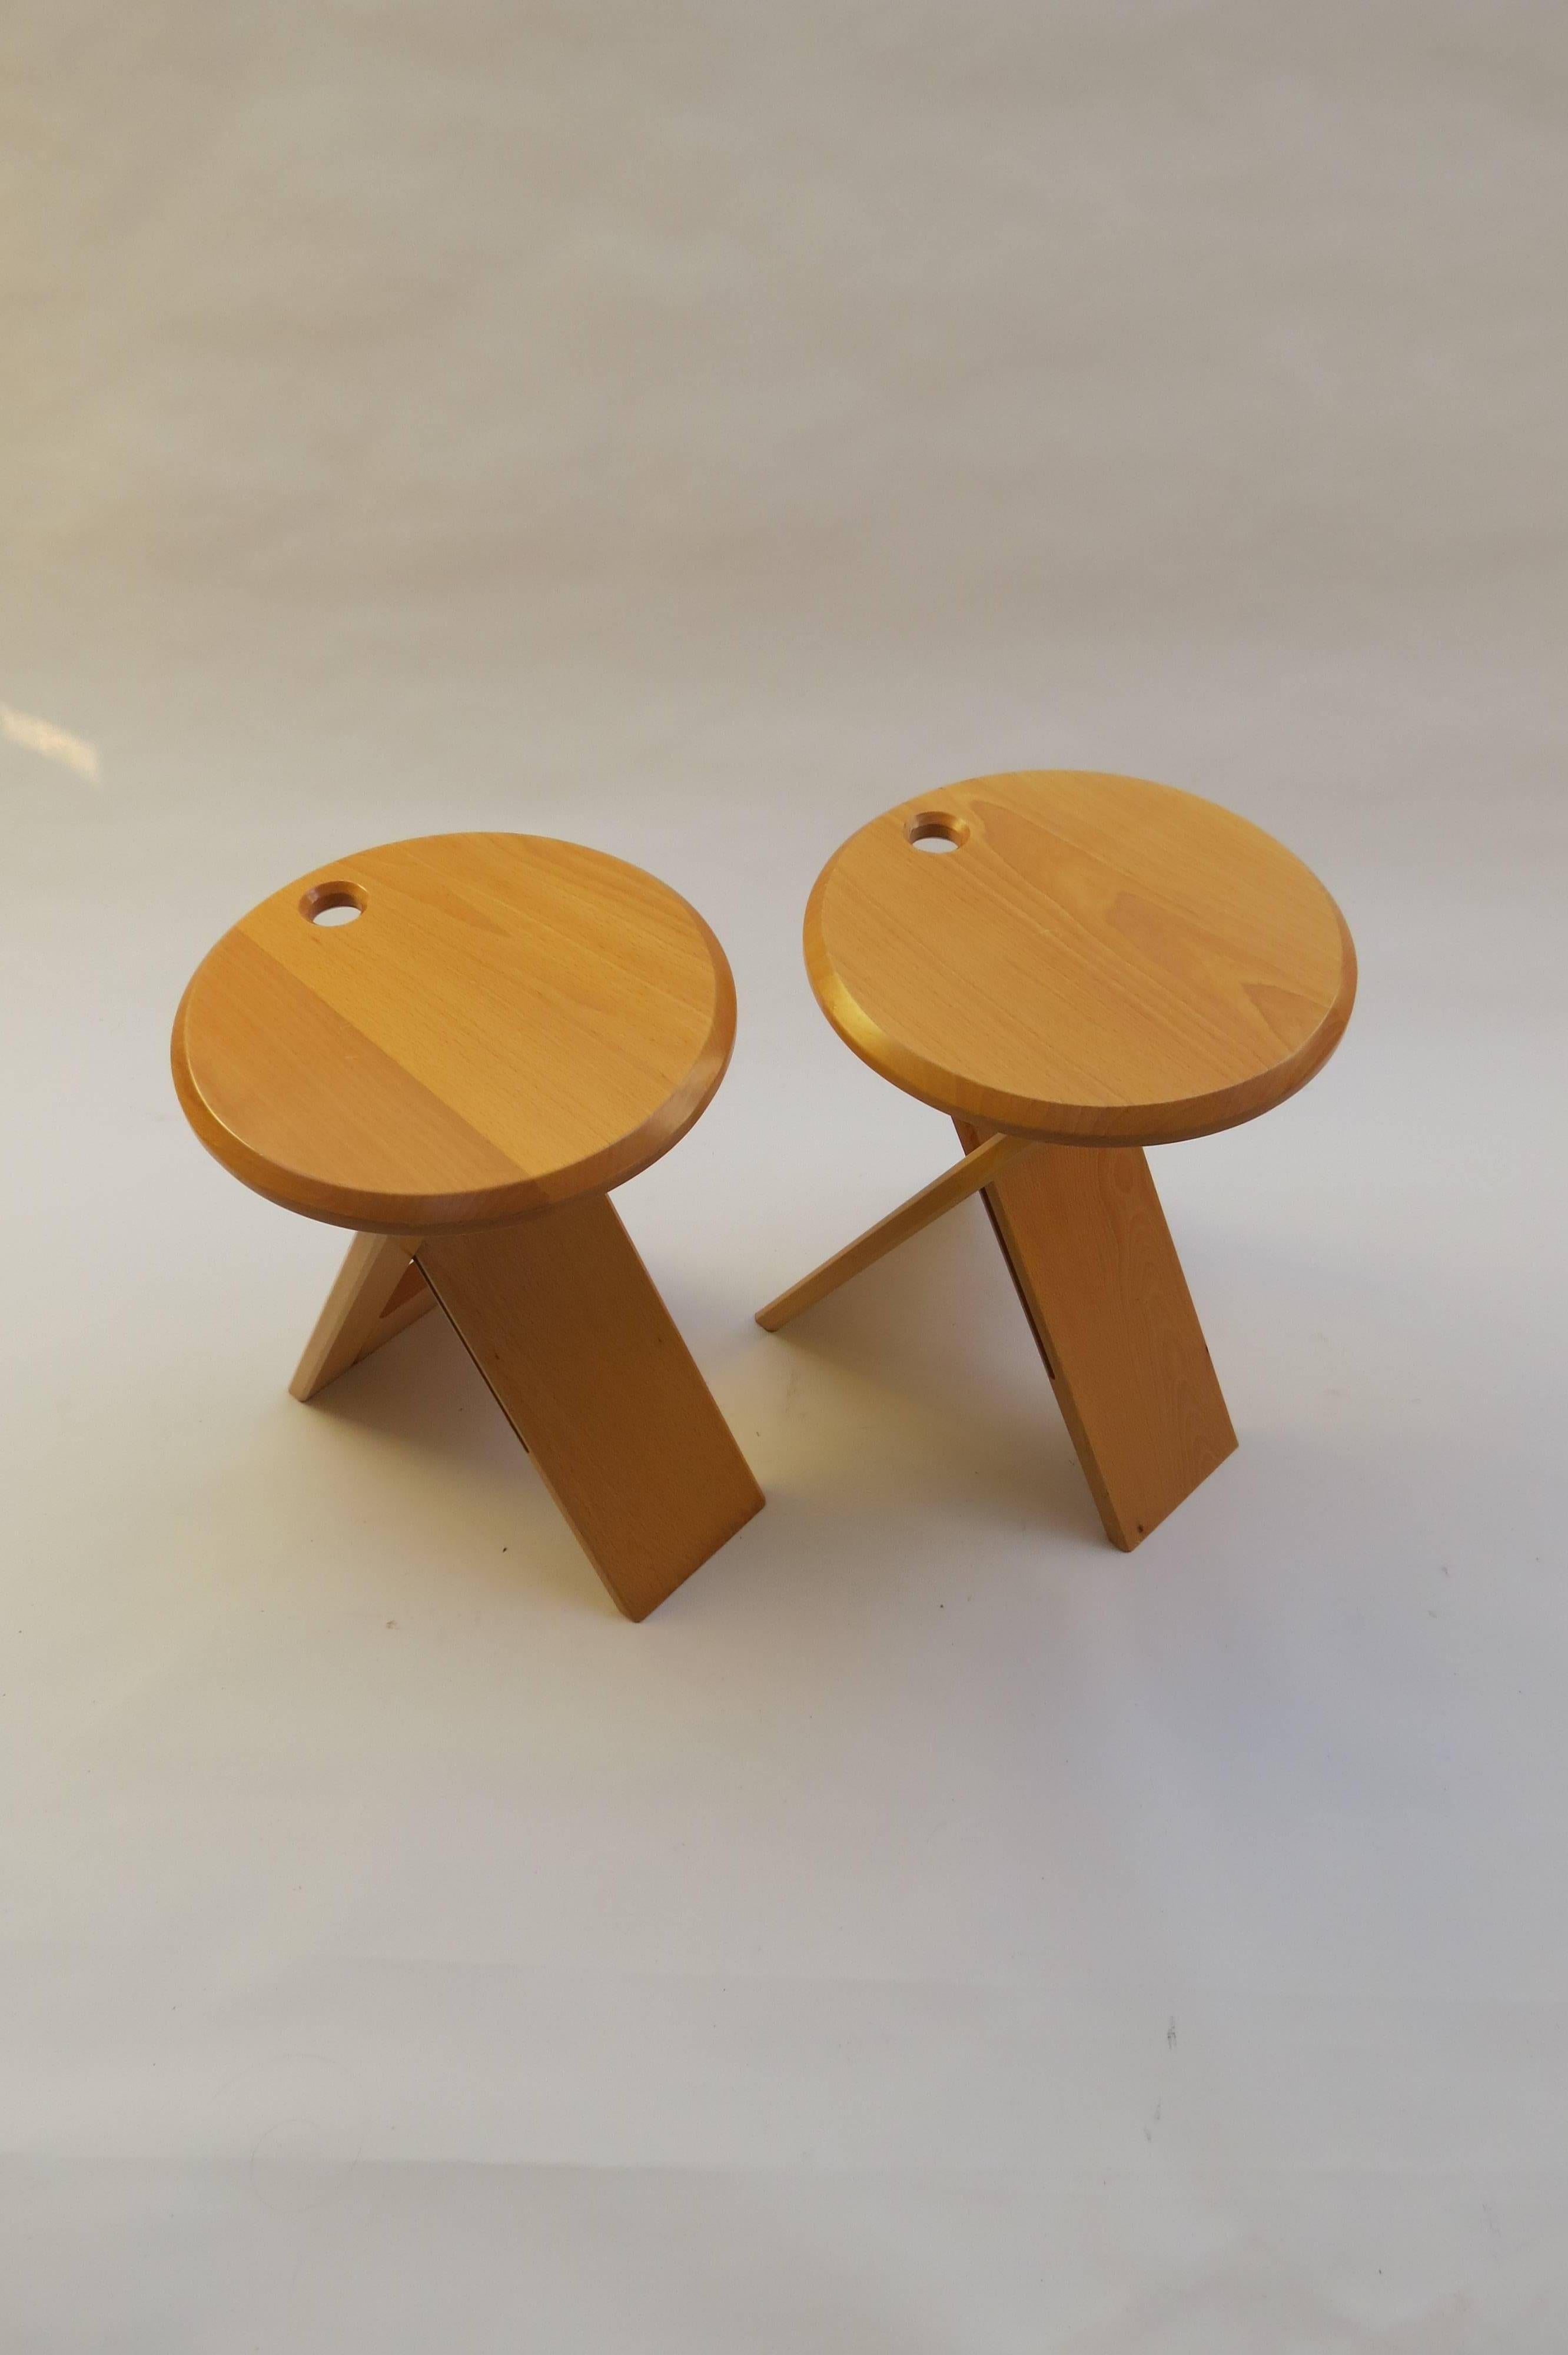 Pair of Suzy stools, designed 1984-1985 by Adrian Reed for Princes Design Works Ltd.
Can be used as stools or as side tables.
Solid beech with plastic/rubber hinges. The stools fold flat when not in use and come with the original hangers, painted